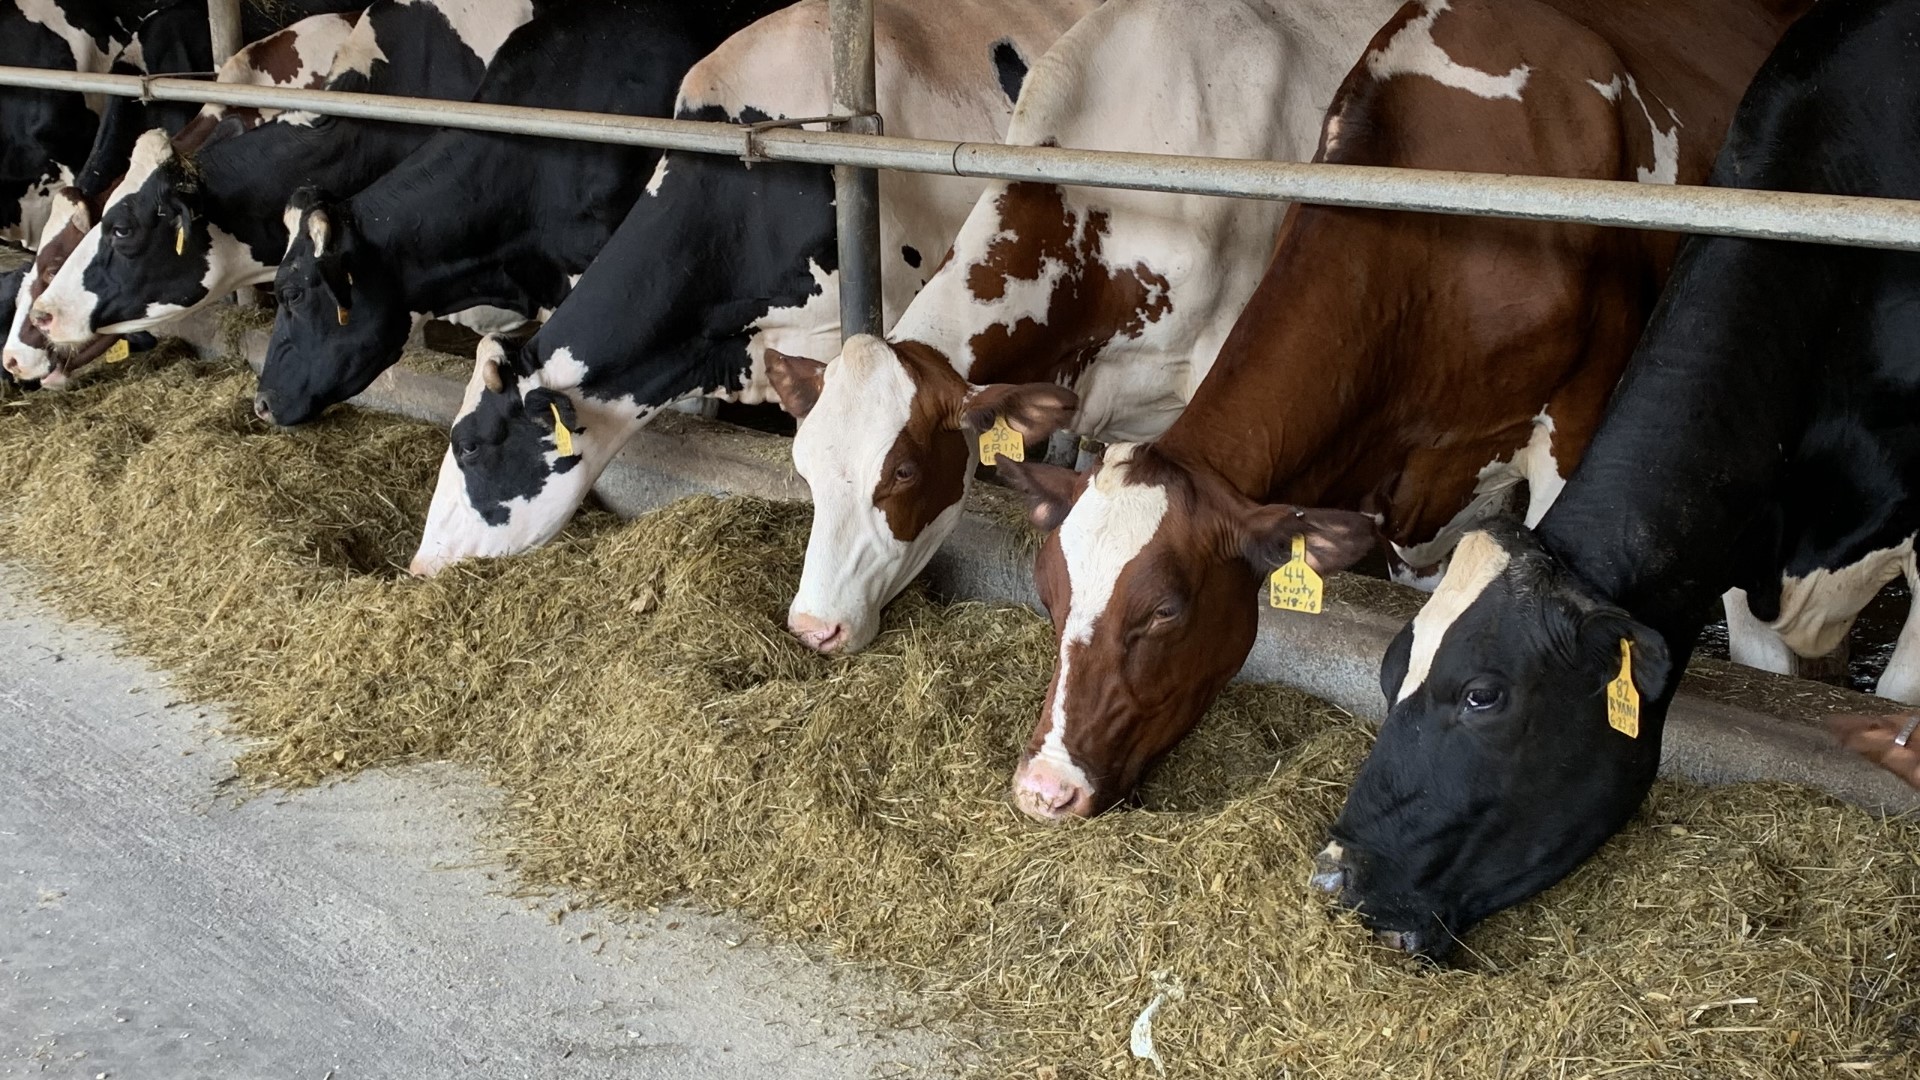 Although there are no cases of bird flu among cows in Pennsylvania, local dairy farms are taking the necessary precautions.